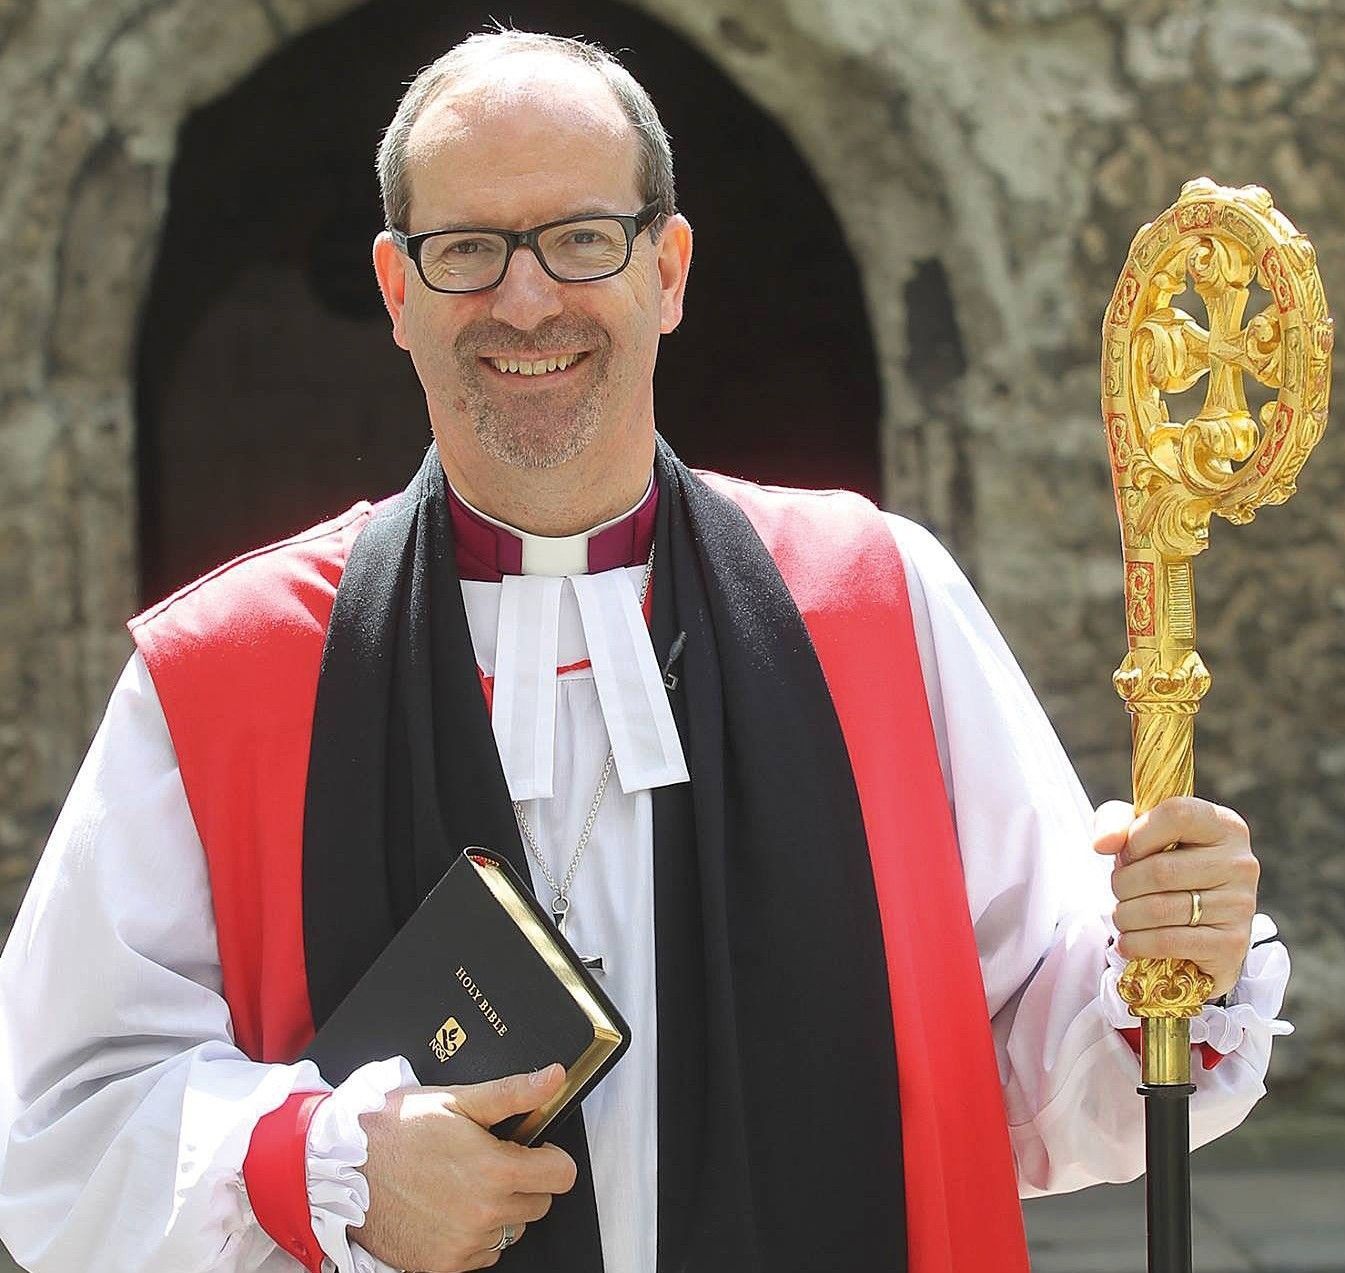 Radiant: Richard Jackson after his consecration